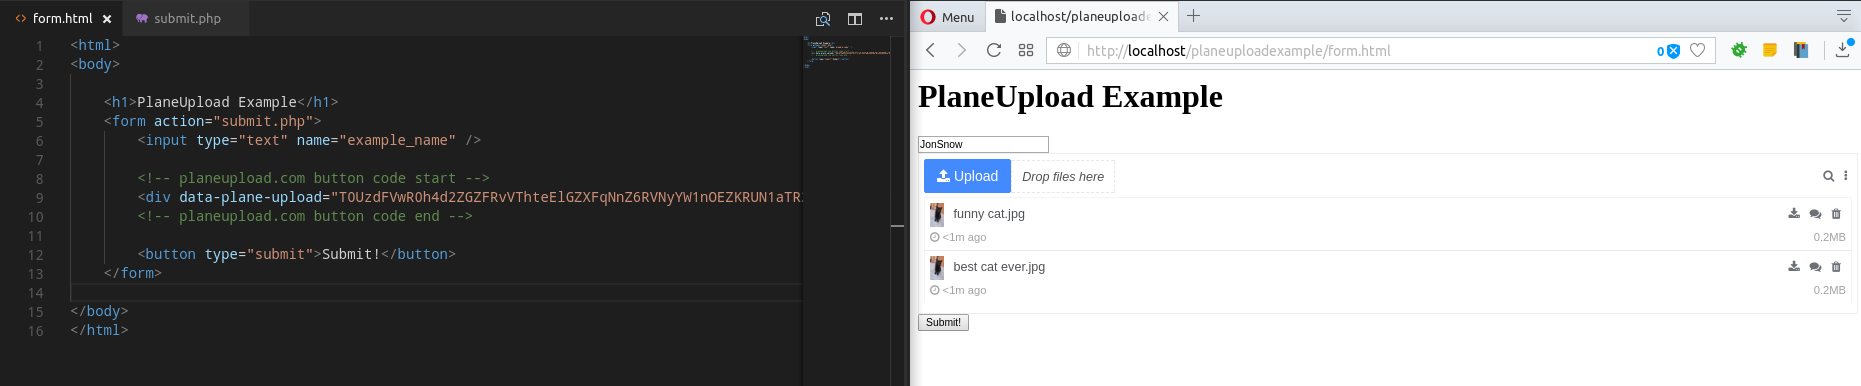 Attachment PHP code, and upload button preview